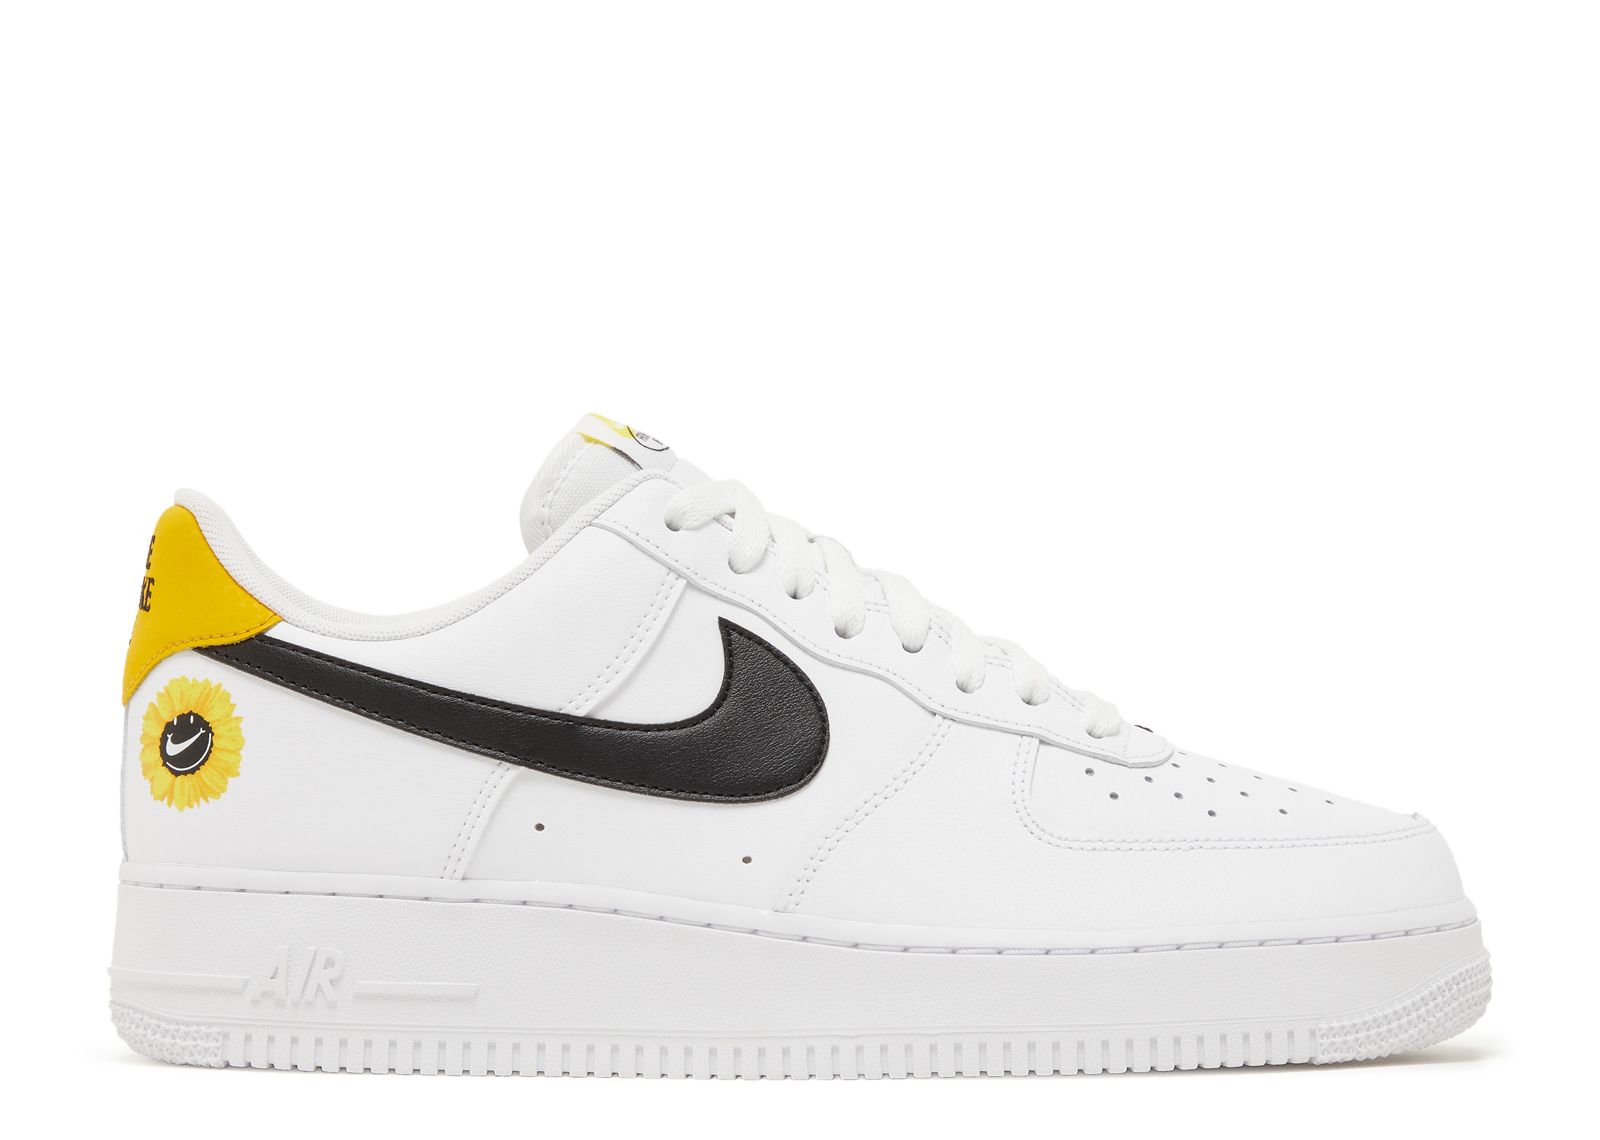 Кроссовки Nike Air Force 1 '07 Lv8 2 'Have A Nike Day', белый